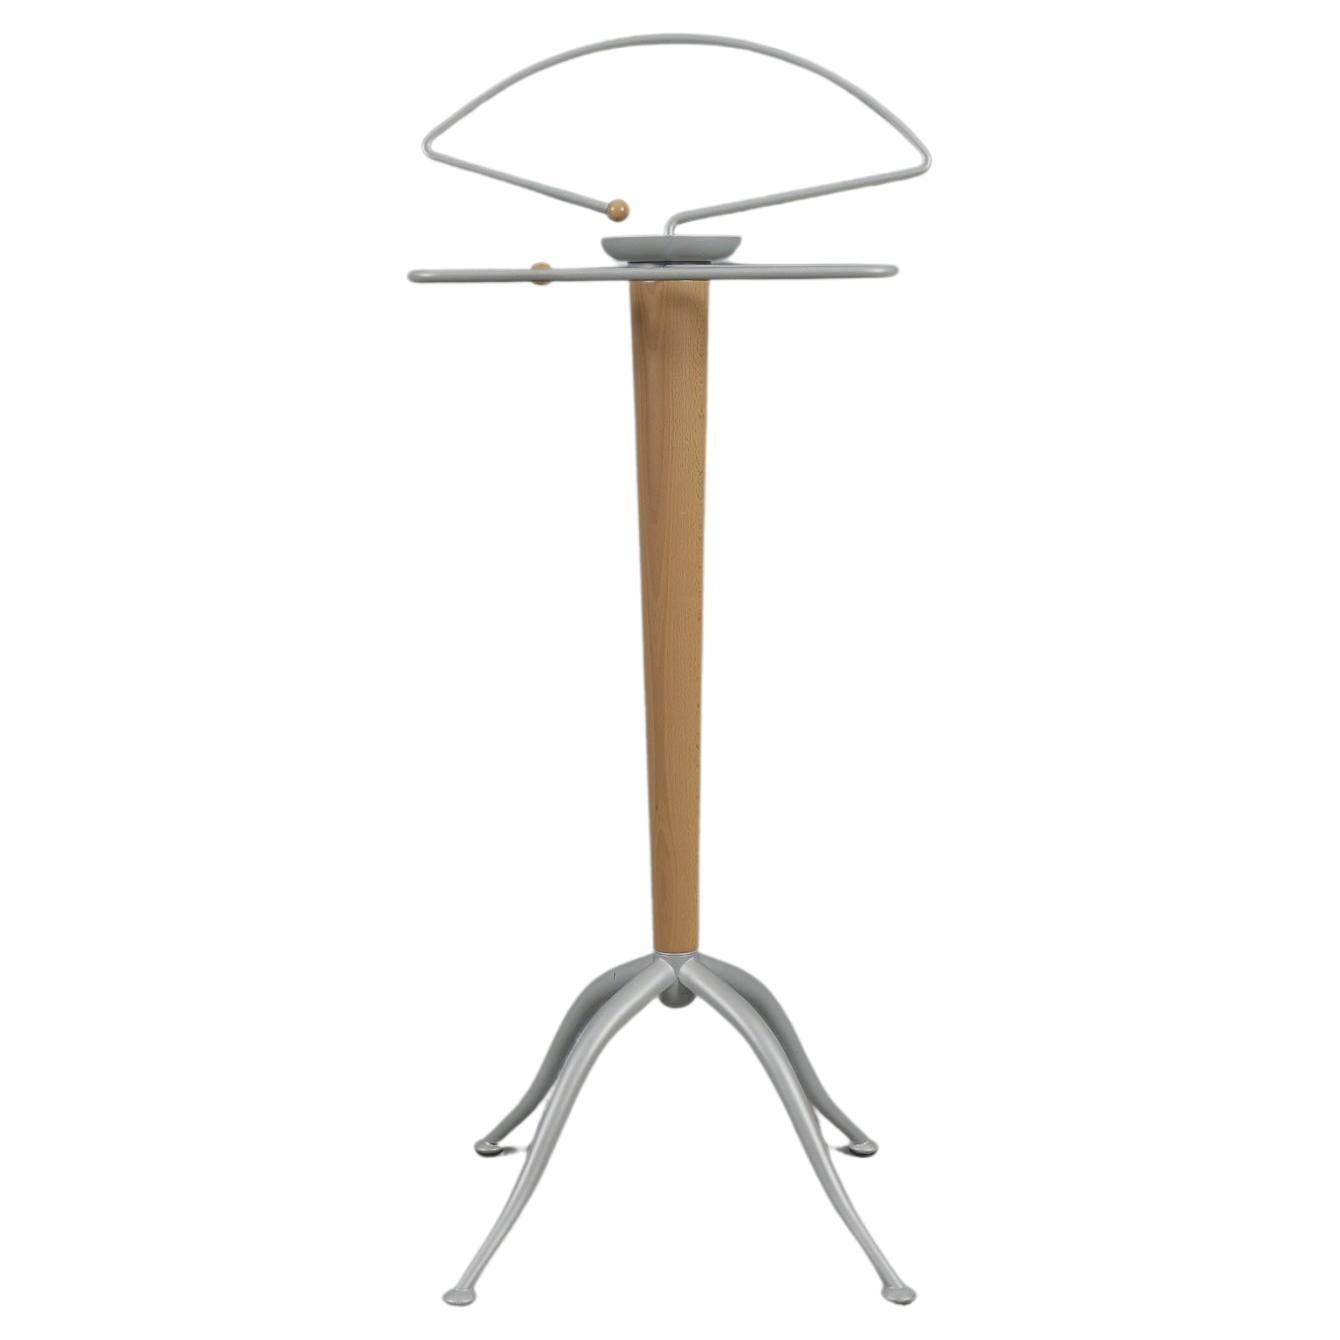 Italian Postmodern Calligaris Valet Stand, Made in Italy 1980s For Sale